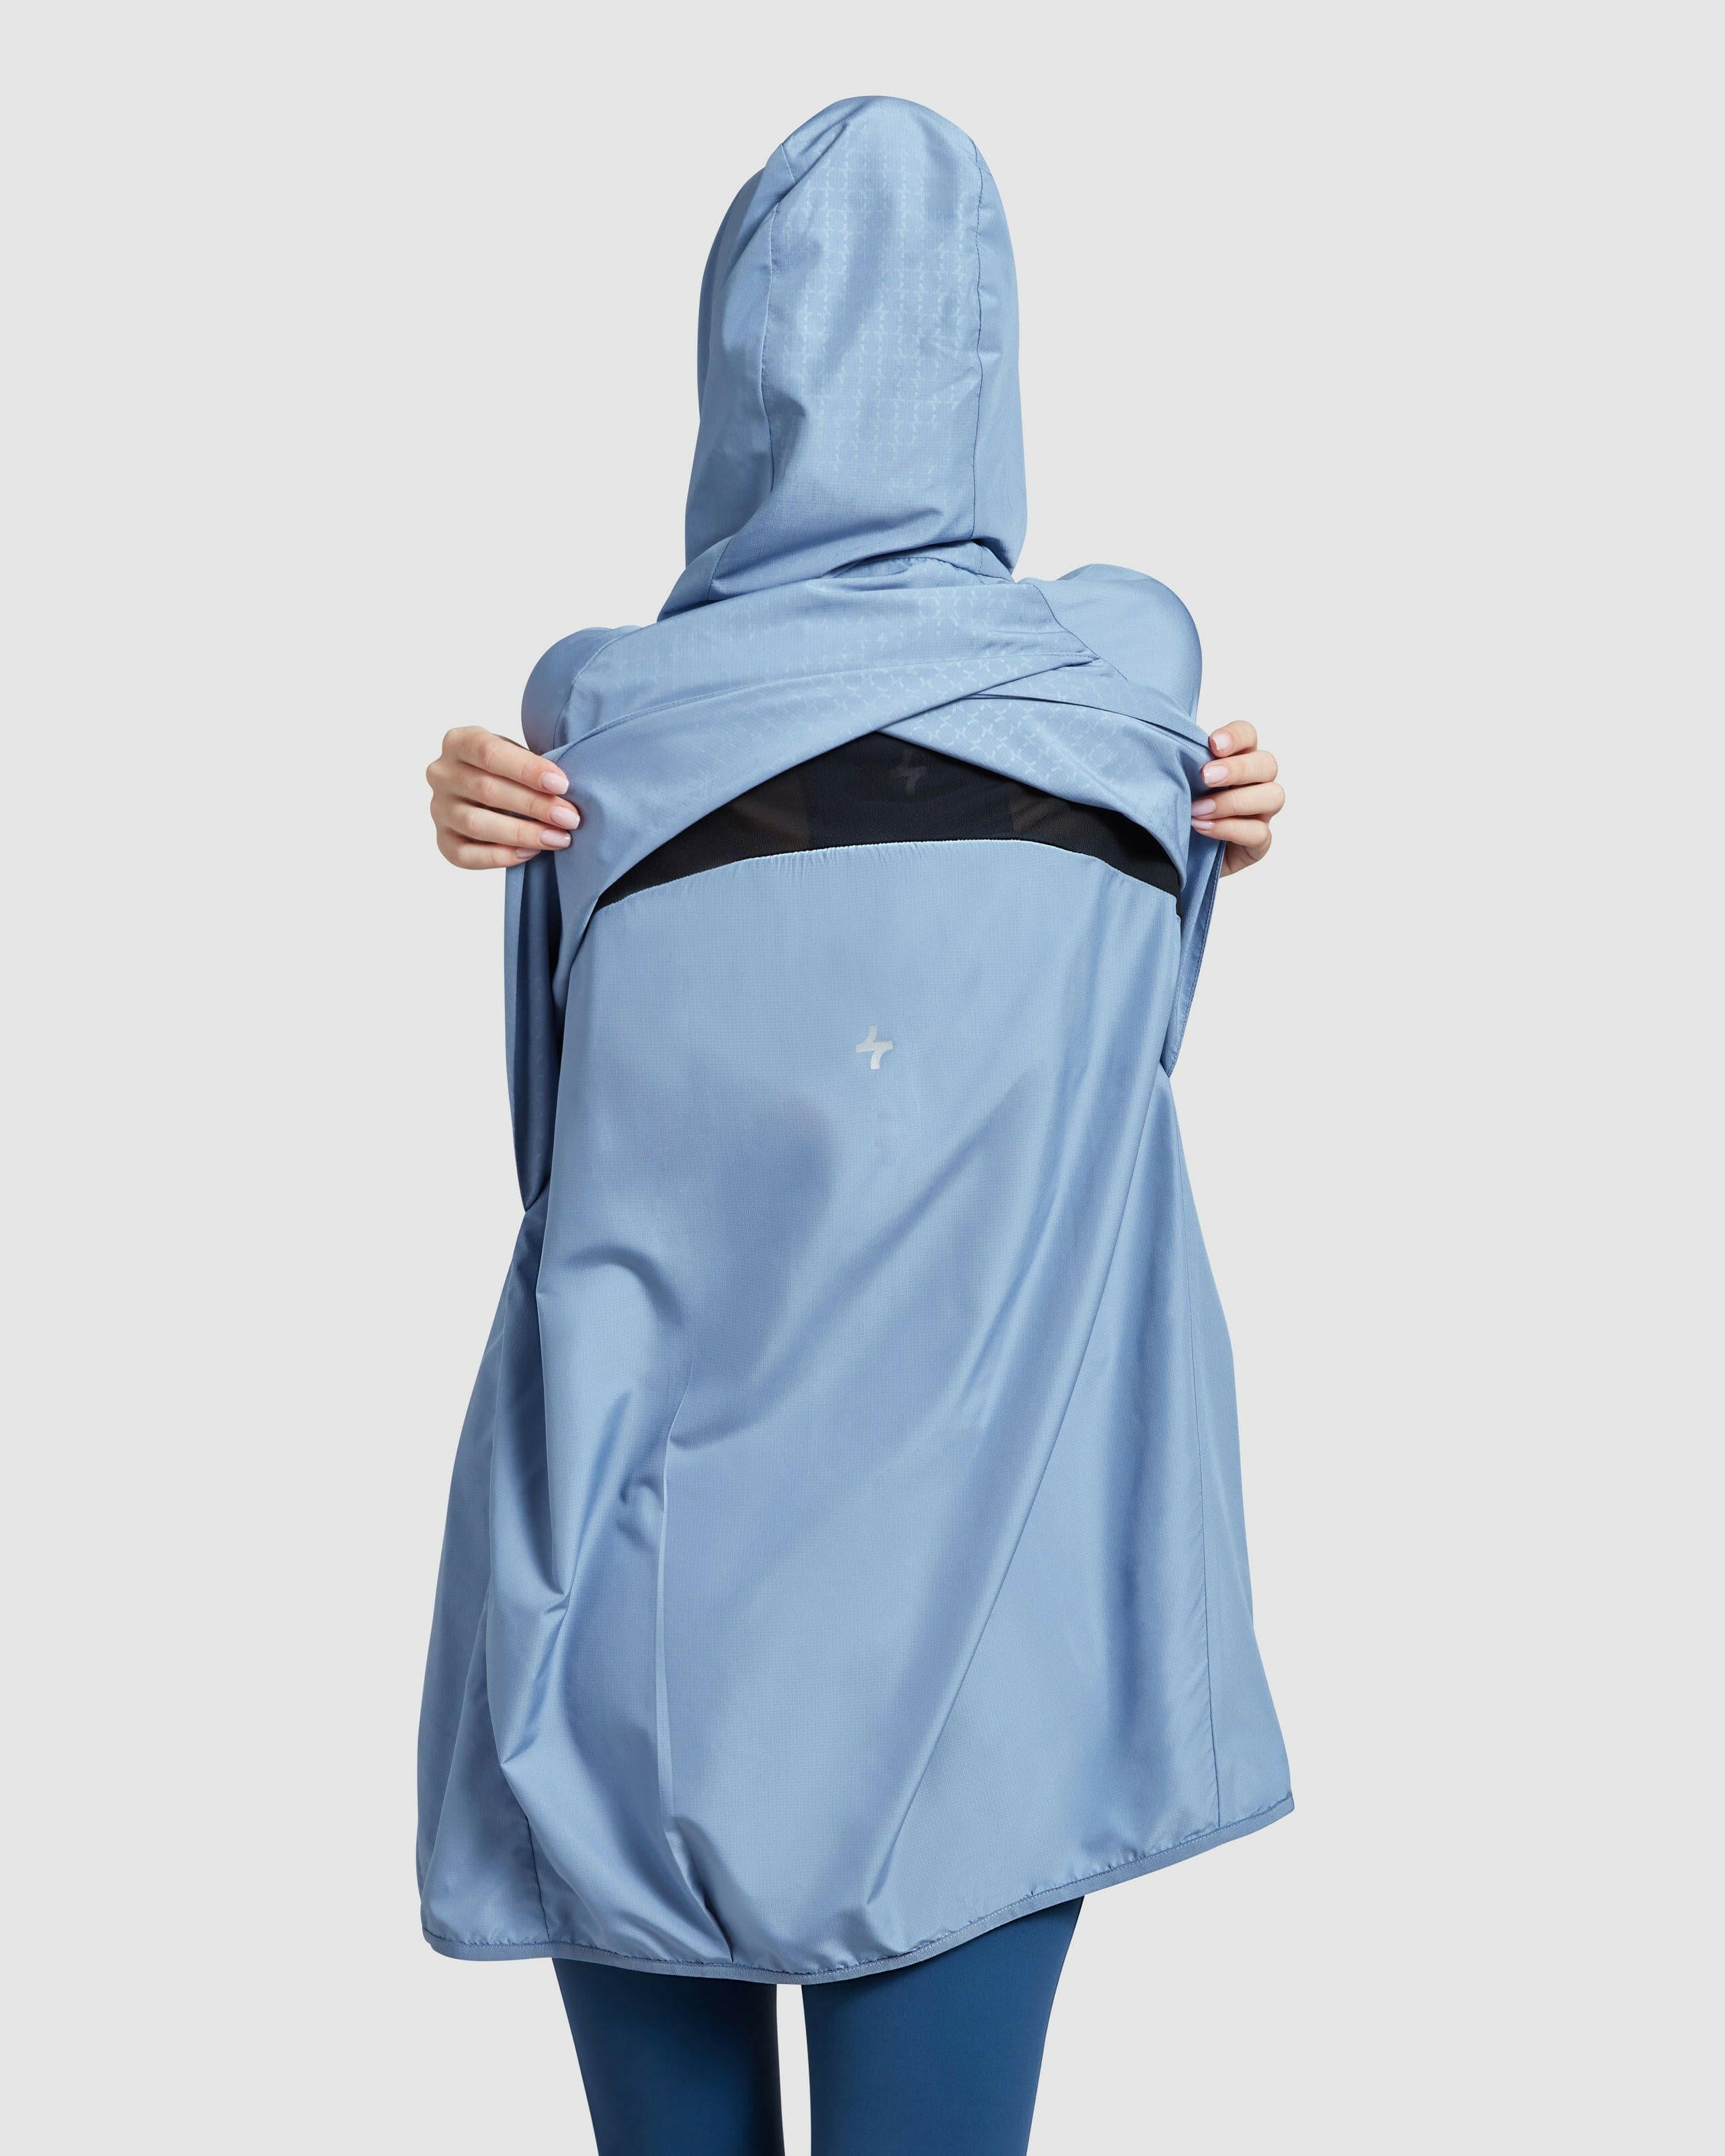 A woman seen from behind wearing a COOLDOWN coat by Qynda in Infinity Blue, made of super light fabric, with a hood casually slung over the shoulder to reveal a black inner lining, against a plain